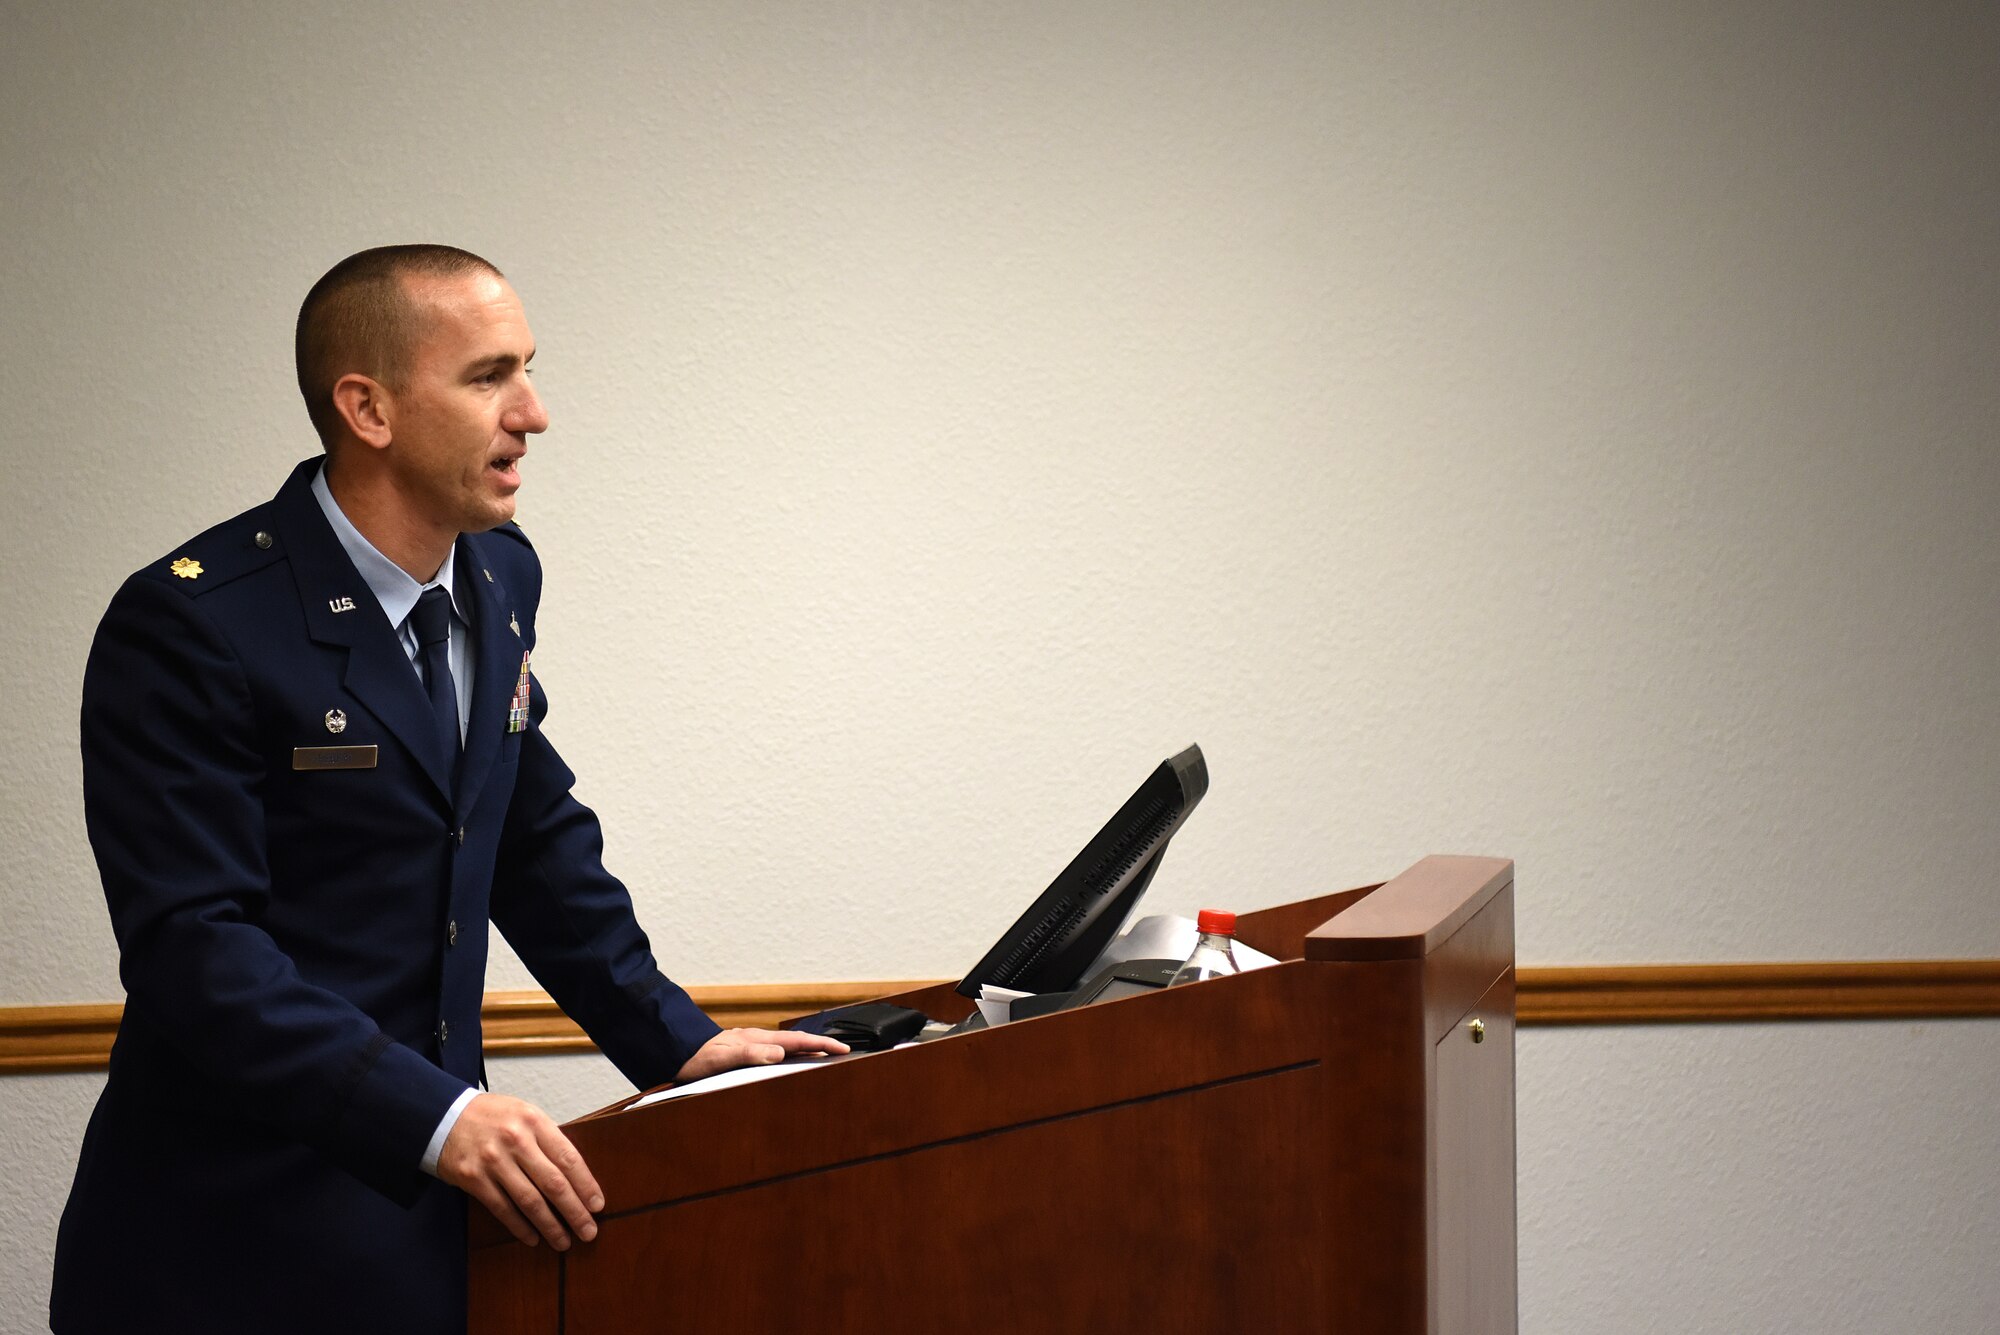 U.S. Air Force Maj. Bruce Hebert, 81st Contracting Squadron commander, gives remarks during the Sablich Center Auditorium room dedication ceremony for George Budz inside the Sablich Center at Keesler Air Force Base, Mississippi, Oct. 31, 2019. The auditorium has been renamed after Budz who passed away Aug. 3, 2018. Budz served as the 81st CONS commander, the 81st Mission Support Group deputy commander and worked nine years in civil service after he retired as a lieutenant colonel. (U.S. Air Force photo by Senior Airman Suzie Plotnikov)